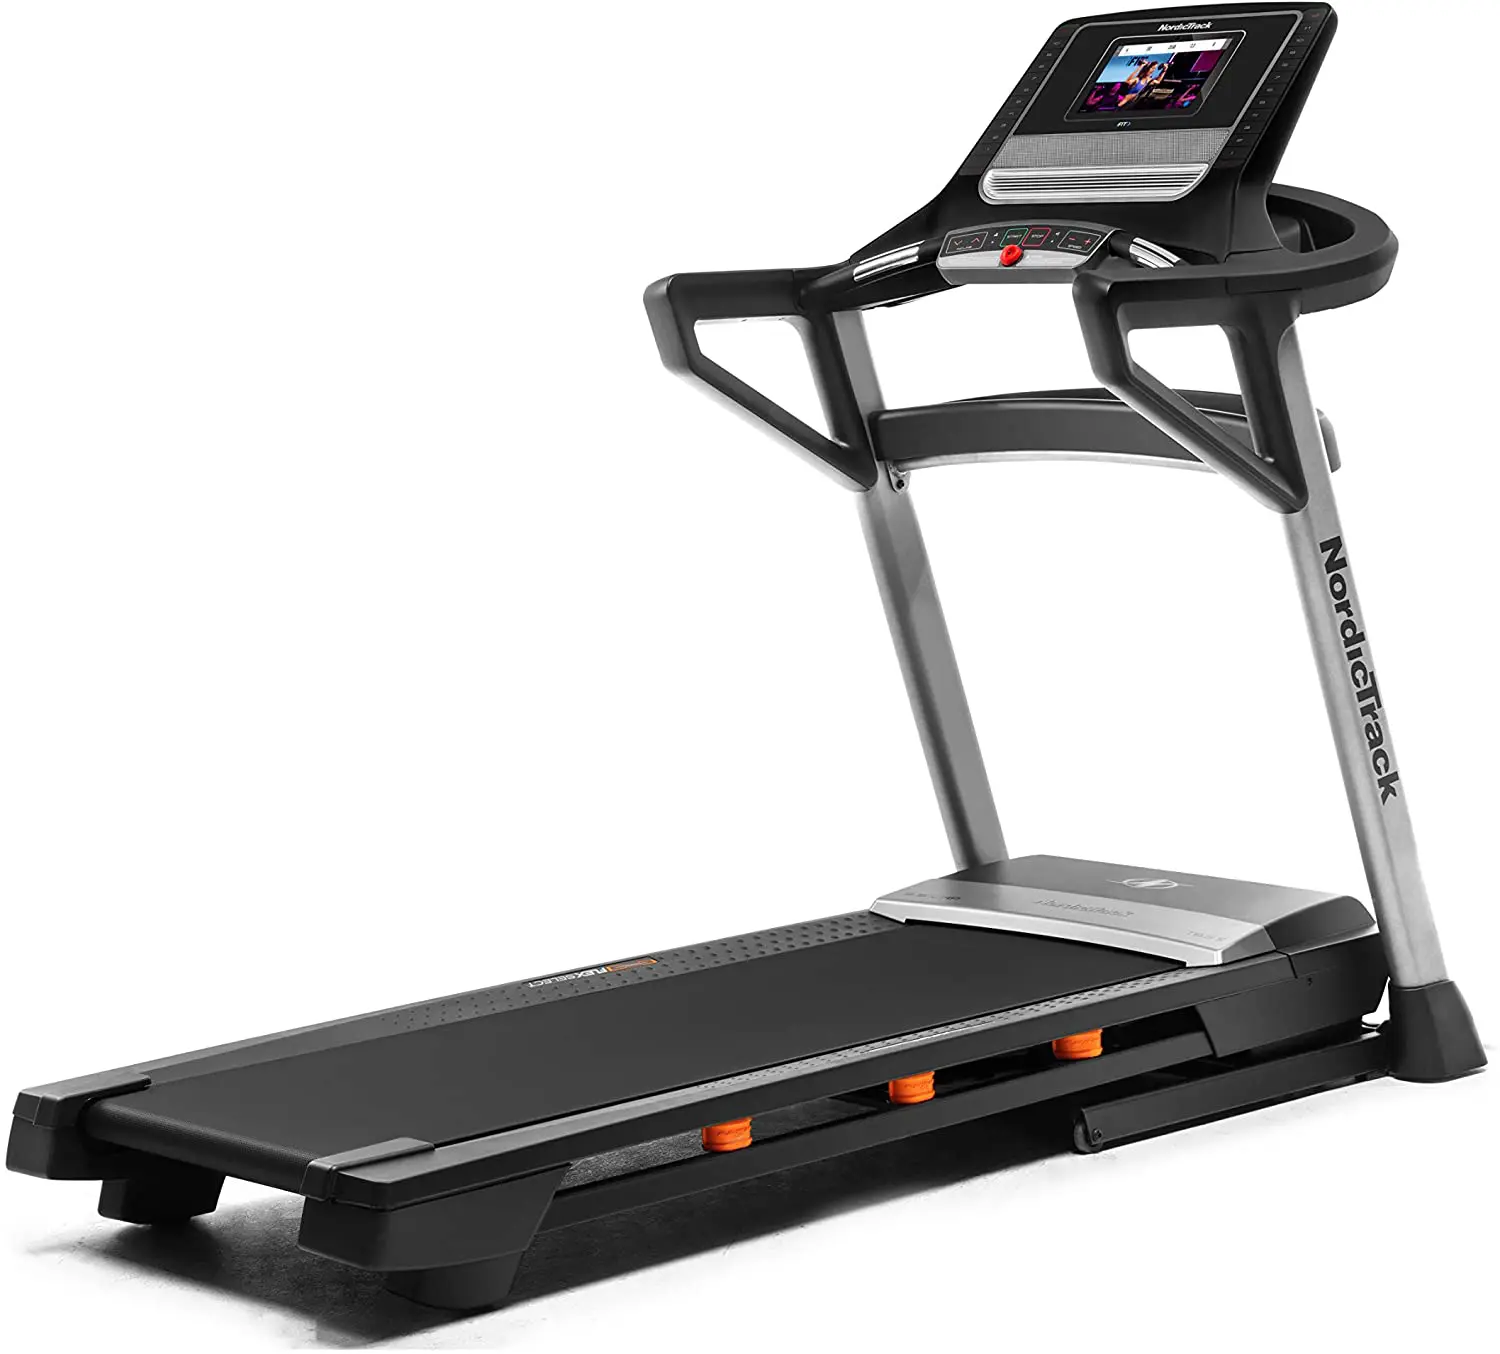 Best treadmill for home NordicTrack T Series Treadmill T8.5S